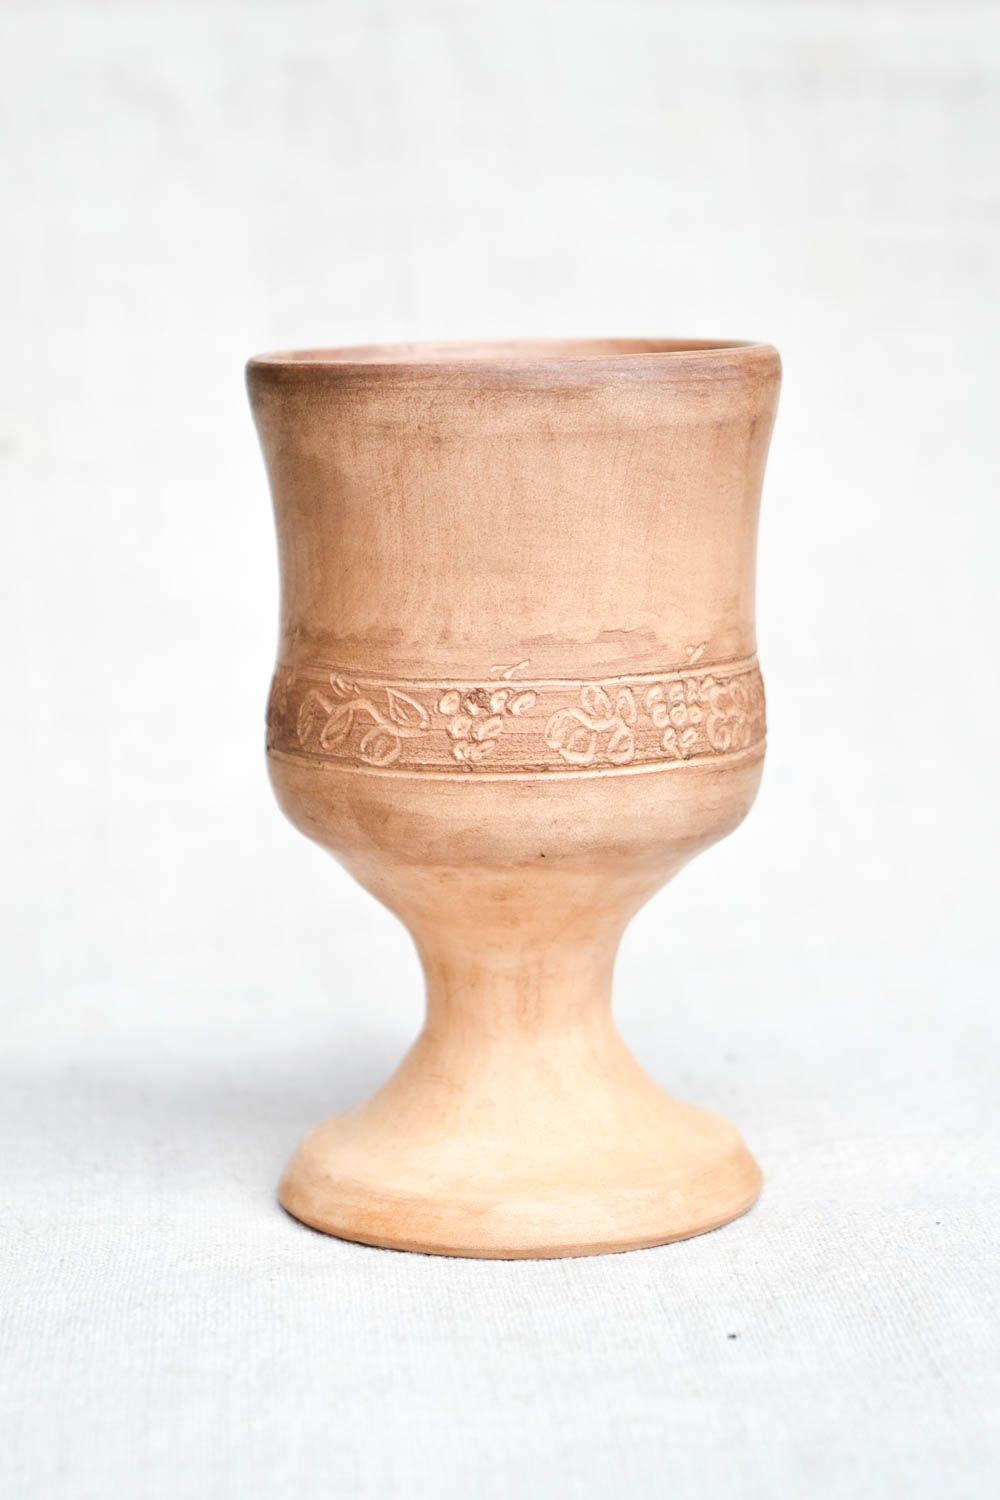 Light brown clay rustic drinking cup on stand with simple plain floral pattern photo 5